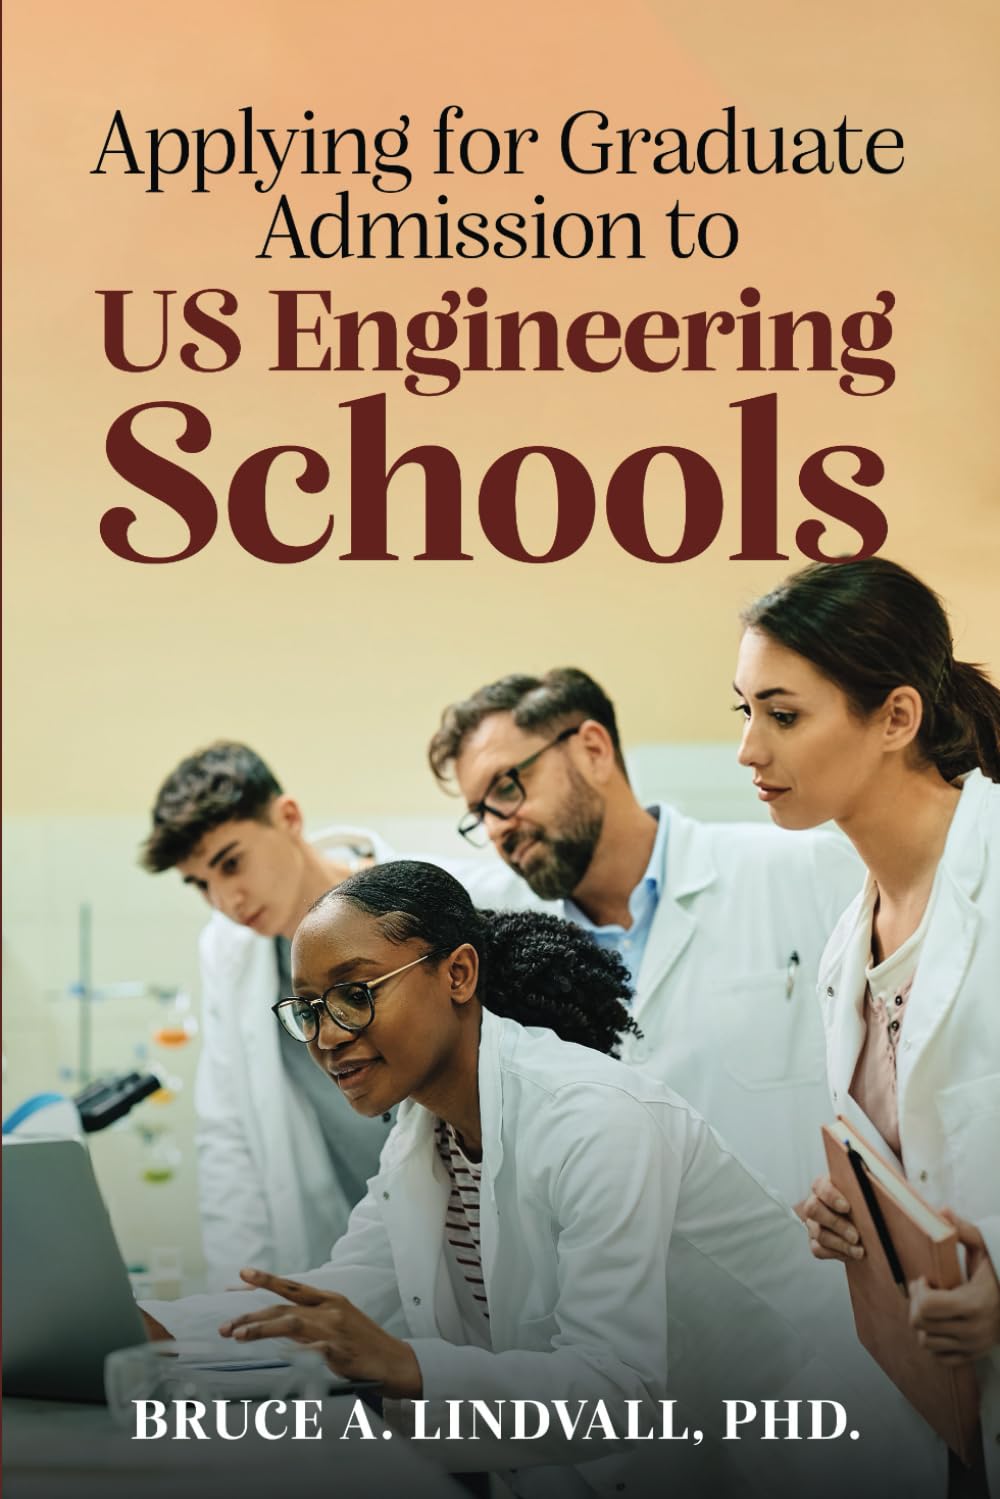 Bruce Lindvall, Ph.D.'s New Book Offers Insider Secrets for US Engineering Grad School Admission